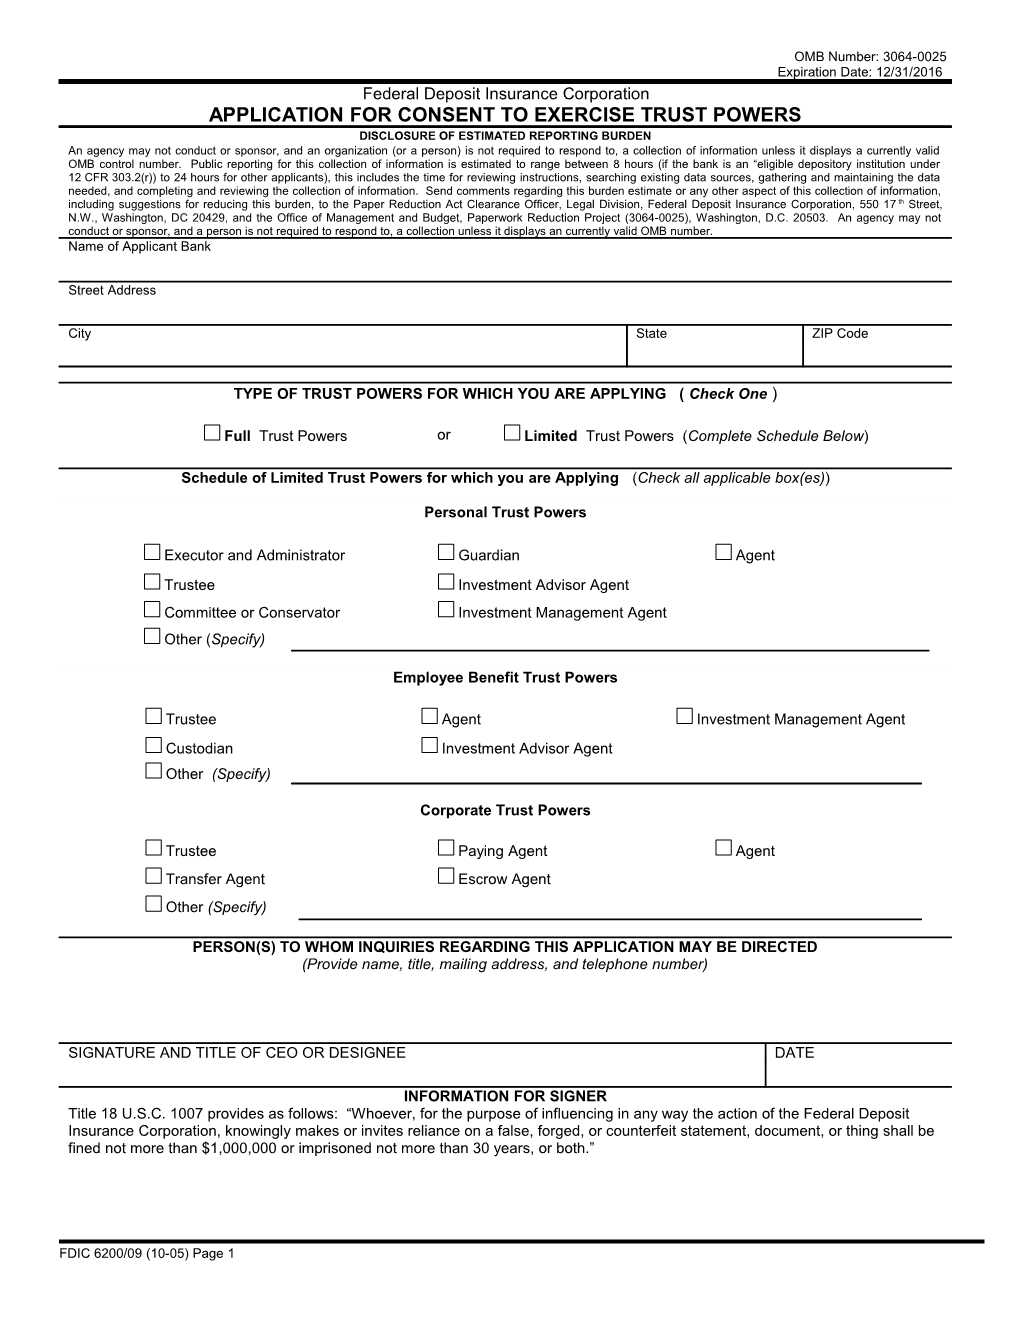 FDIC 6200/09 , Application for Consent to Exercise Trust Powers